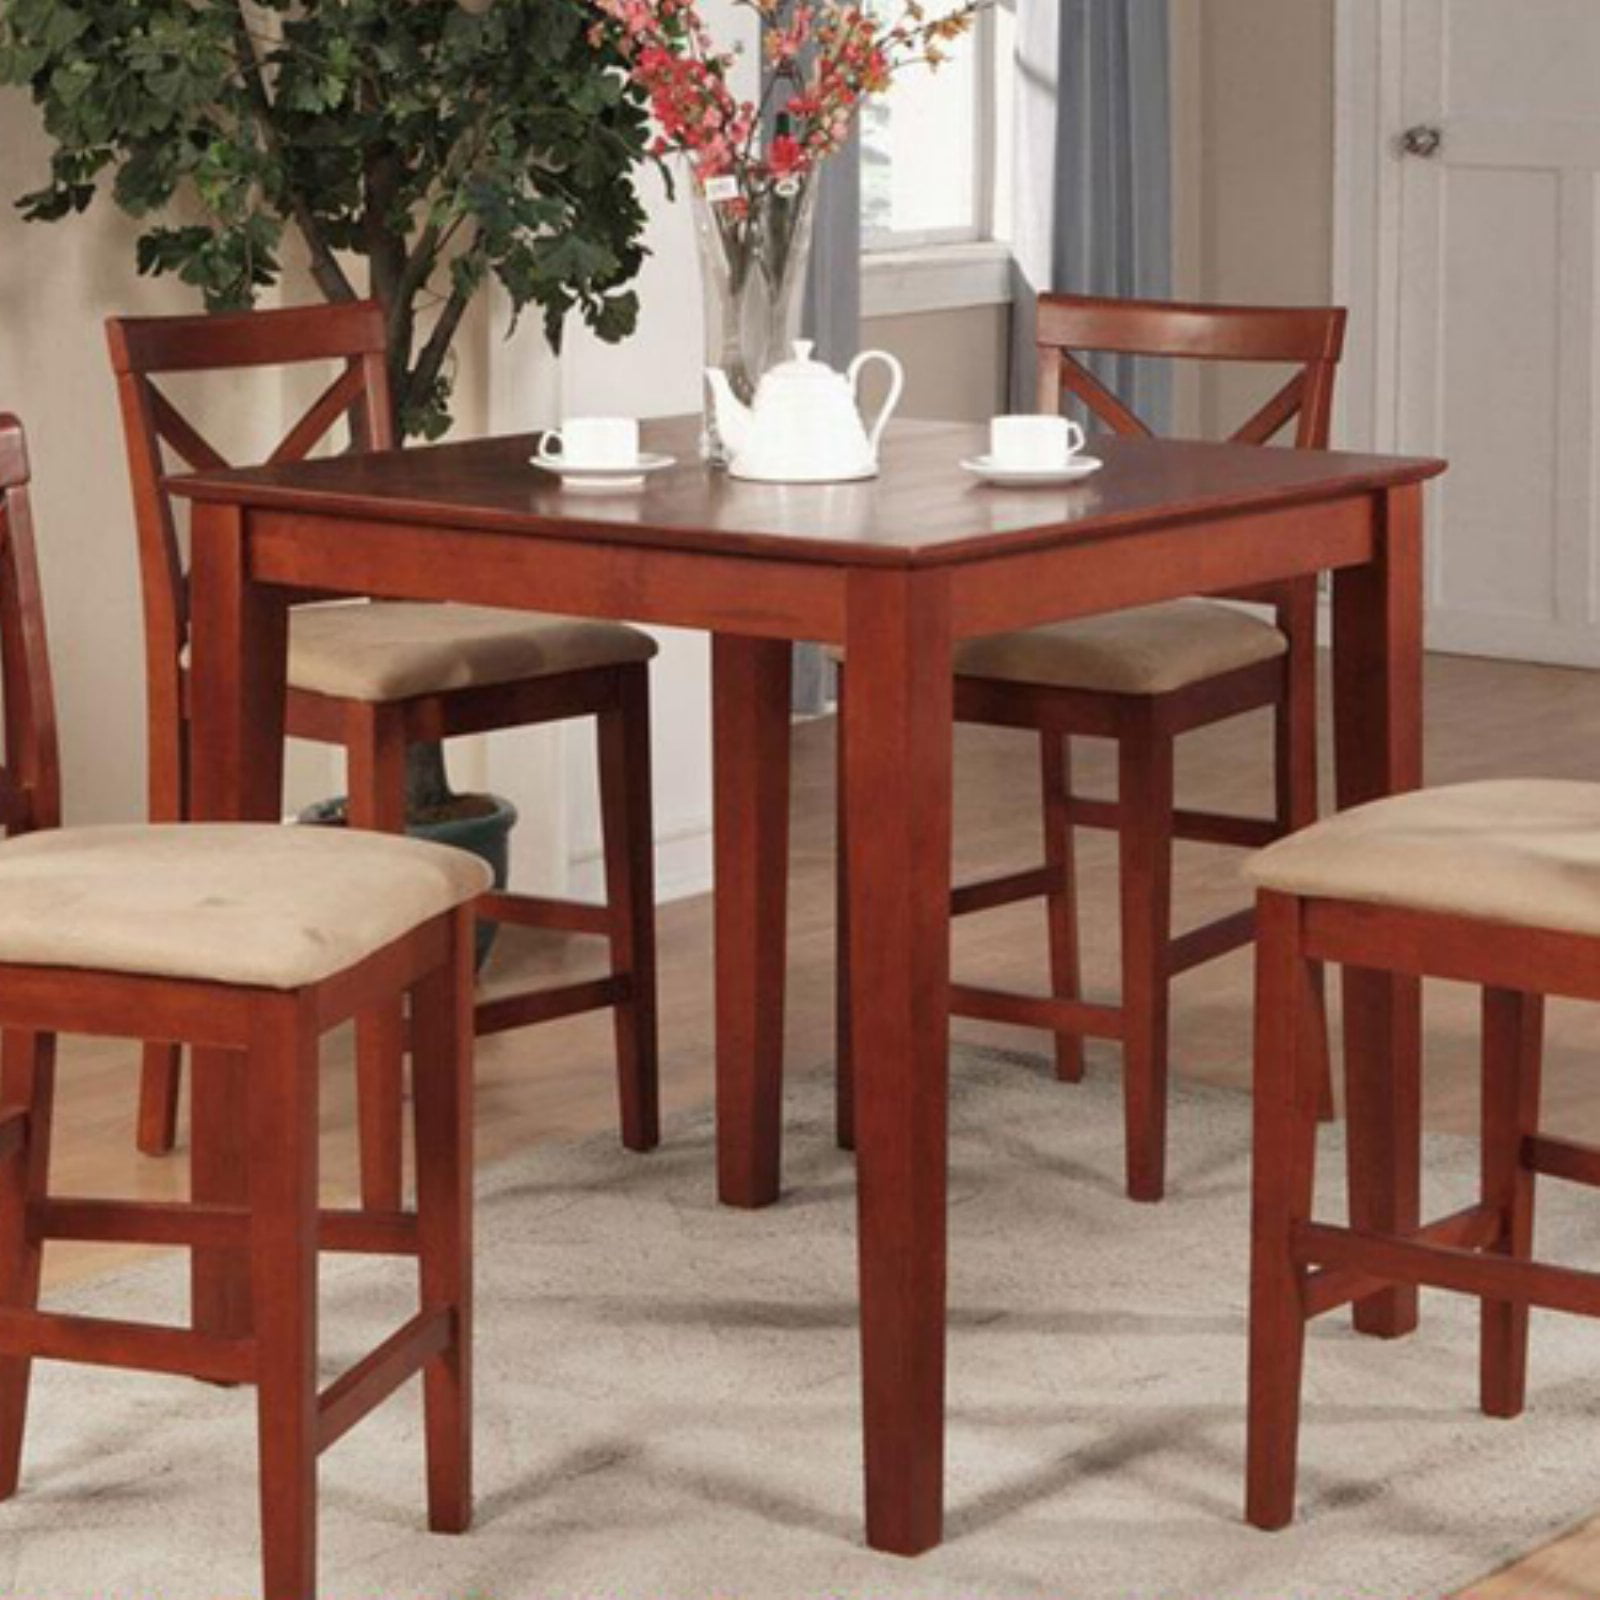 East West Furniture Boston Square Counter Height Pub Table - Walmart